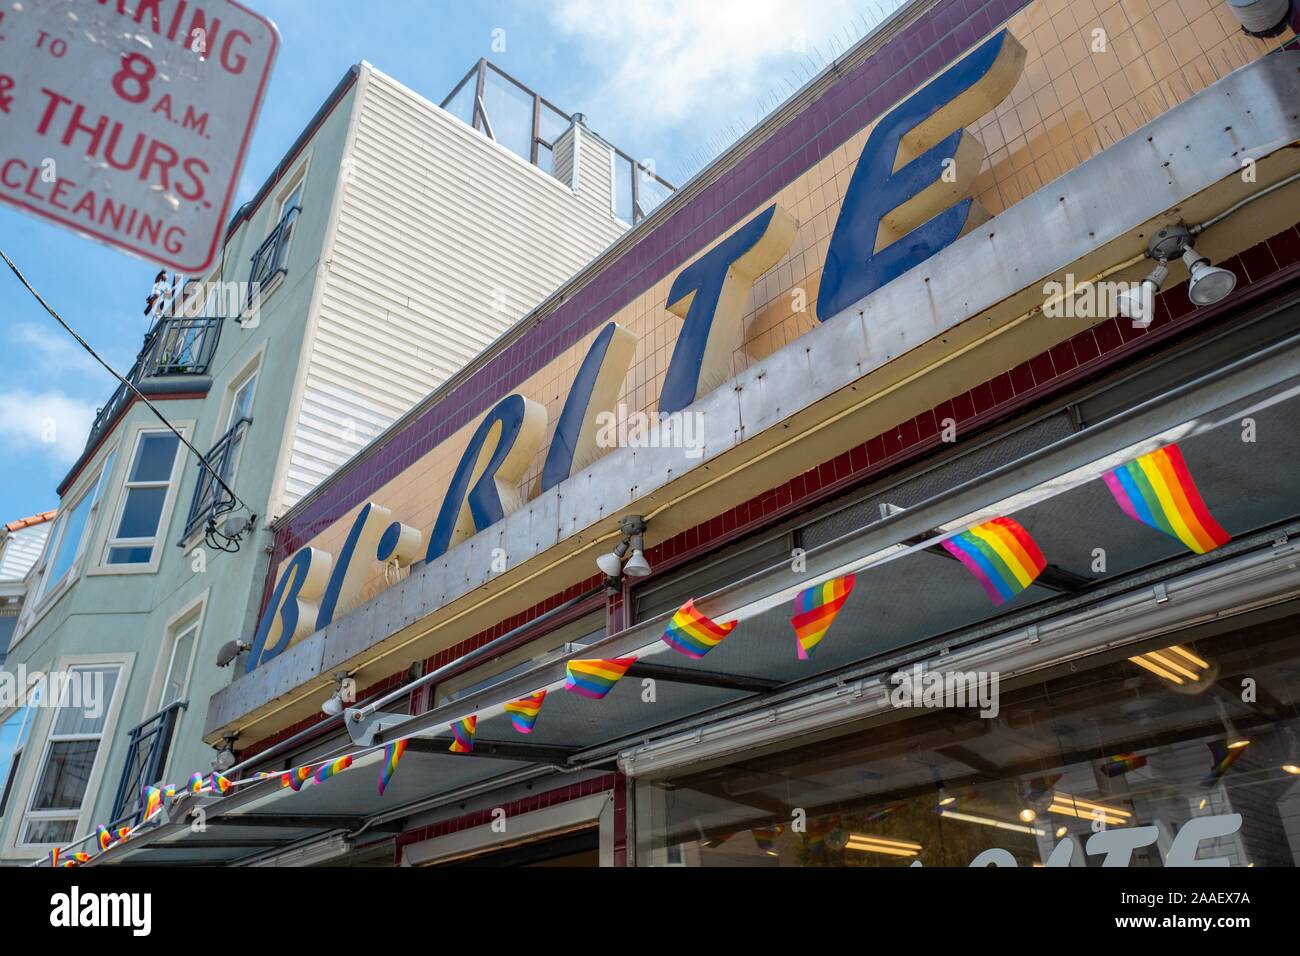 https://c8.alamy.com/comp/2AAEX7A/facade-with-original-art-deco-style-sign-at-the-iconic-bi-rite-18th-street-market-originally-opened-in-1940-in-the-mission-district-of-san-francisco-california-with-string-of-rainbow-lgbt-pride-flags-july-18-2019-2AAEX7A.jpg